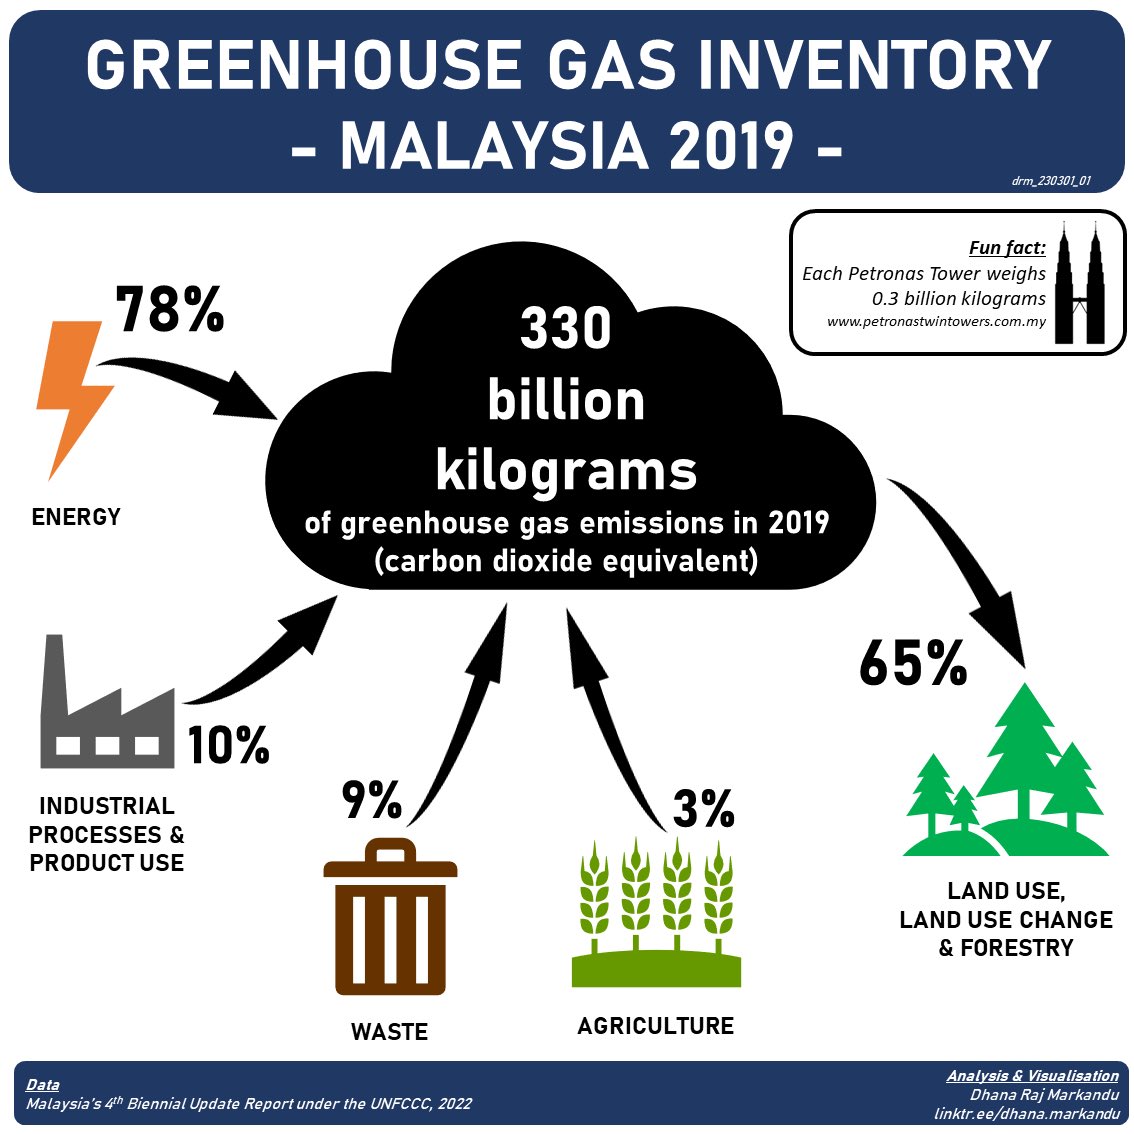 Malaysia emitted 330 billion kilograms of greenhouse gases in 2019.

This is equivalent to the mass of 1100 Petronas Towers.

#energyliteracy #greenhousegases #emissions #drmdata